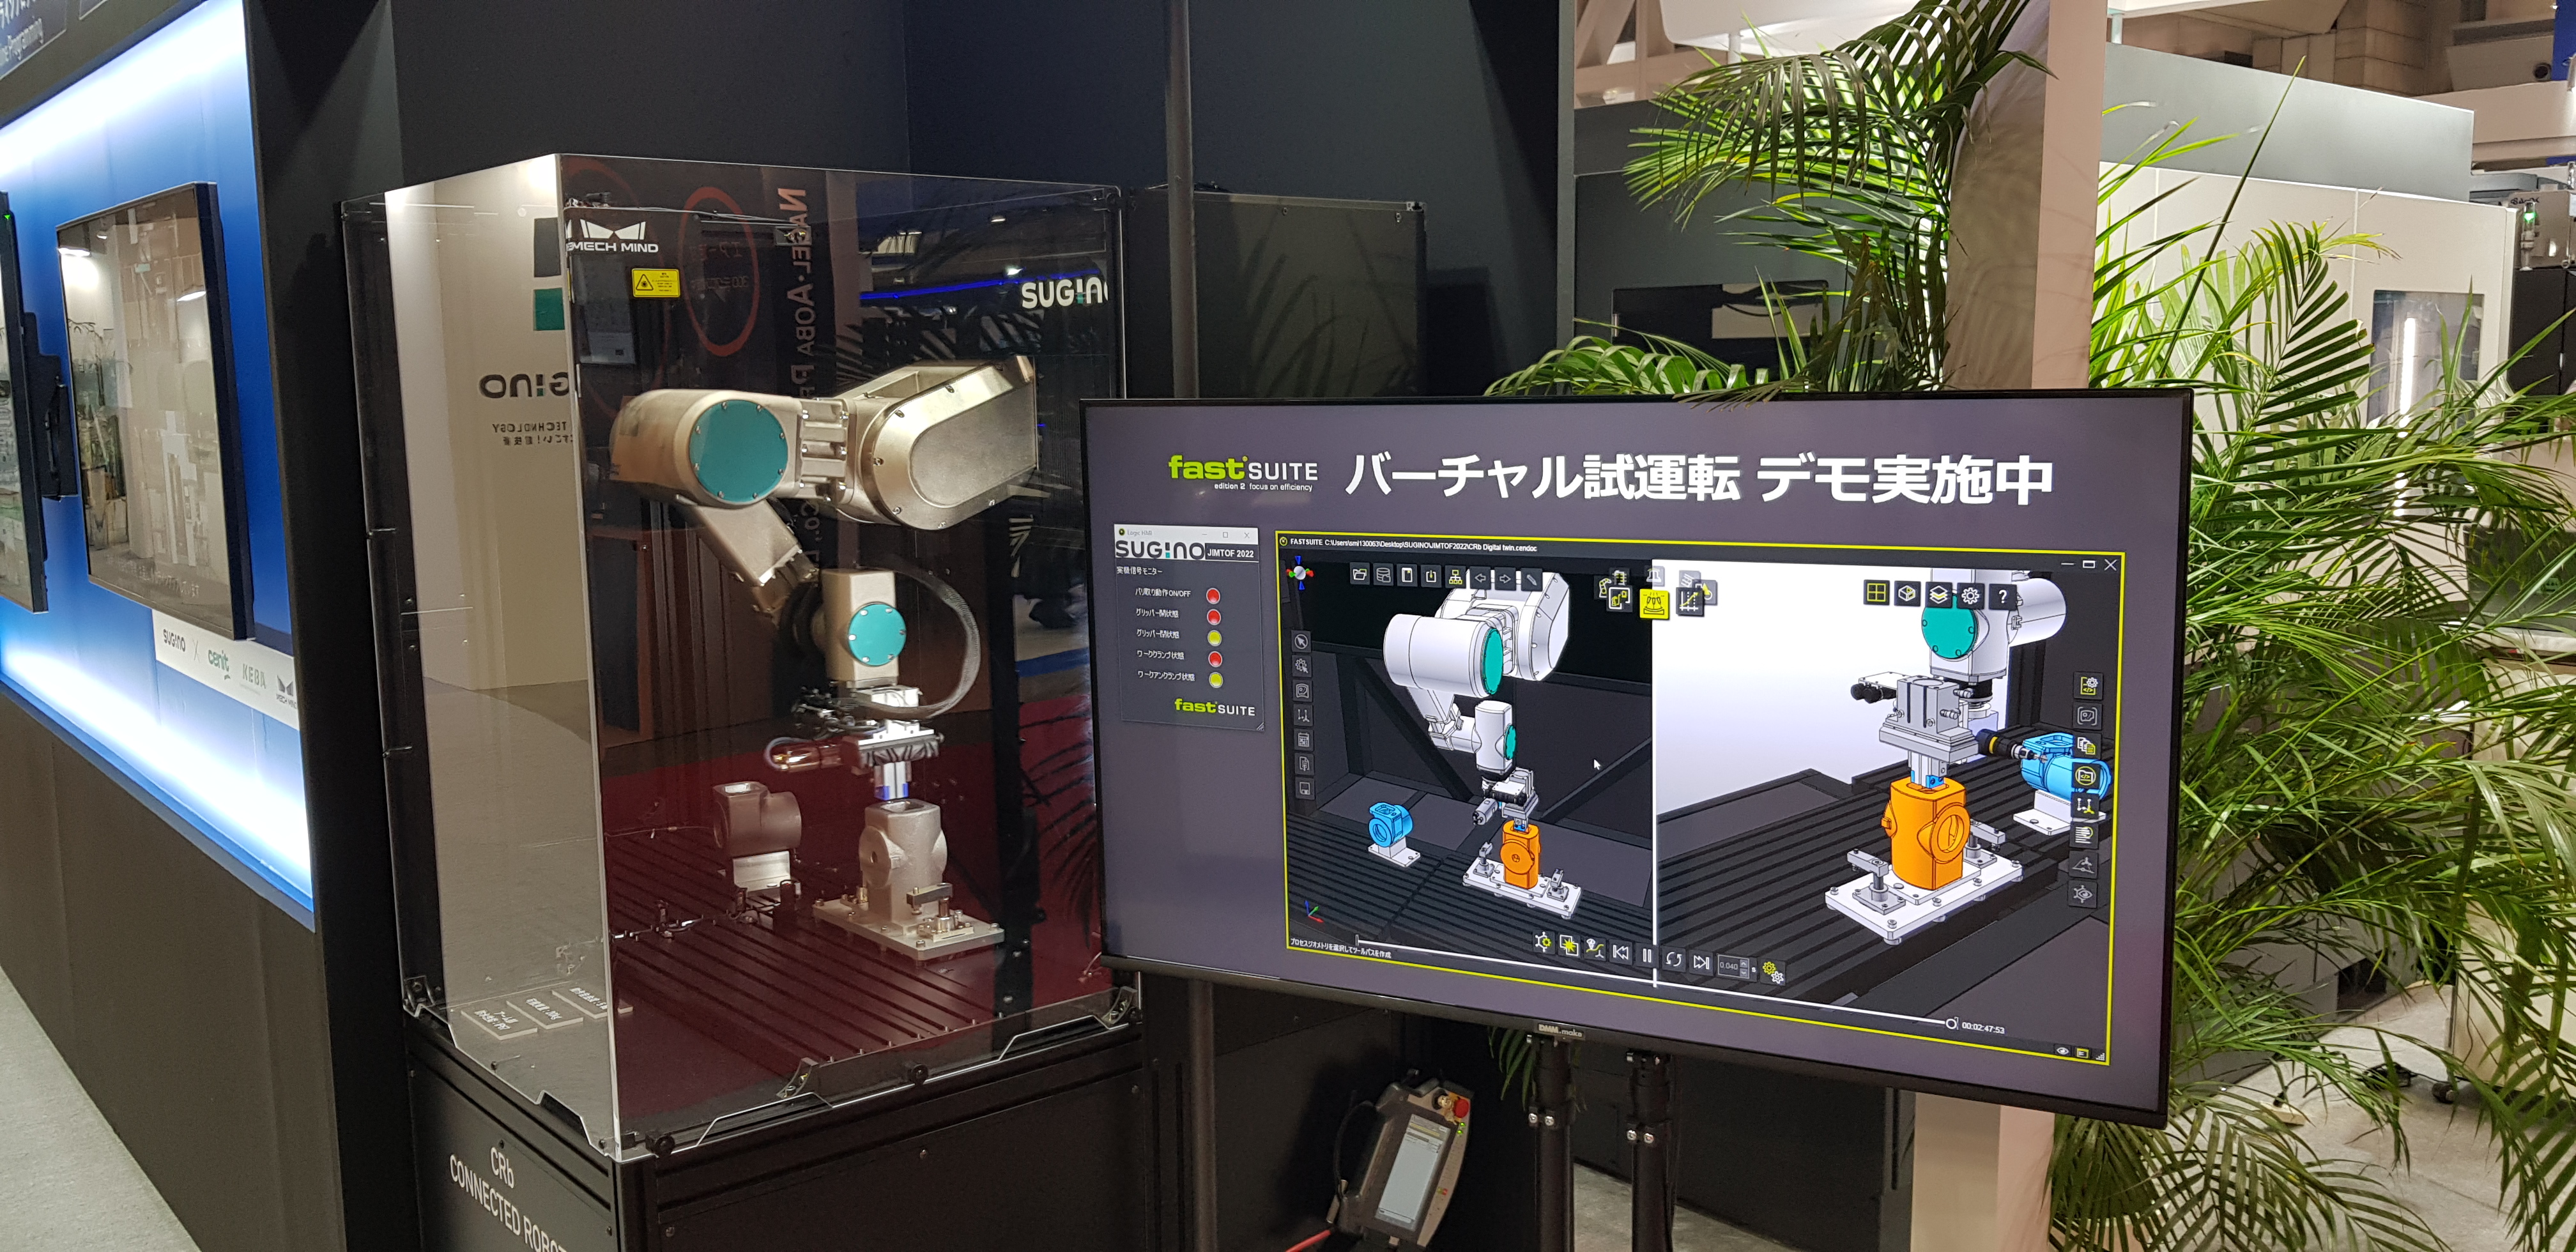 Sugino’s new robot model “CRb” – the physical product and its digital twin in FASTSUITE